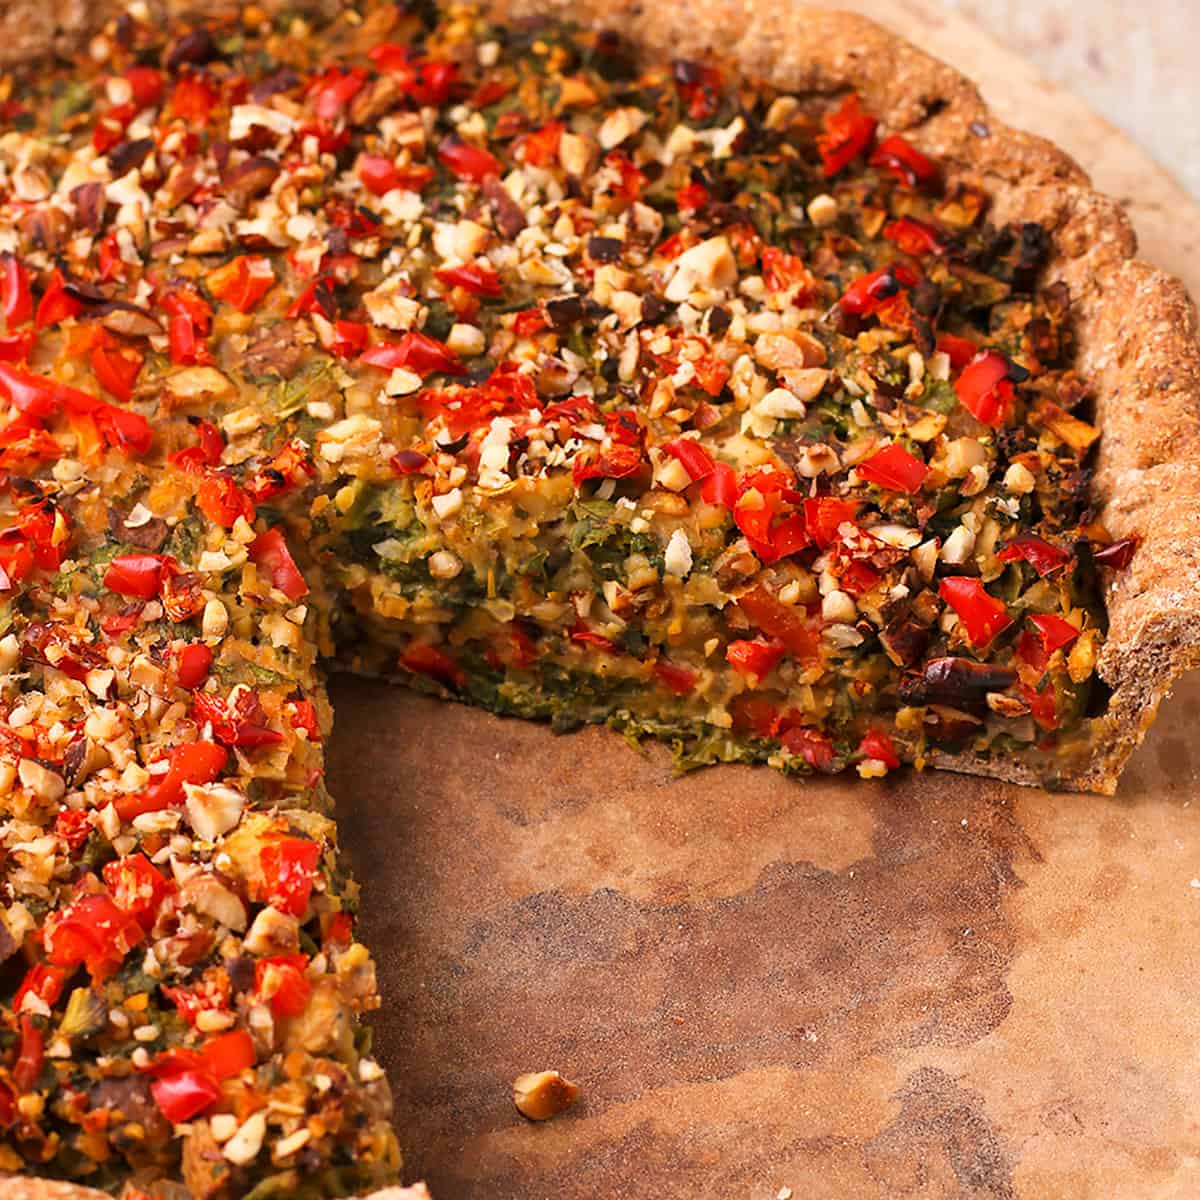 A baked vegan quiche with mushrooms and kale is cut and placed on a stone.